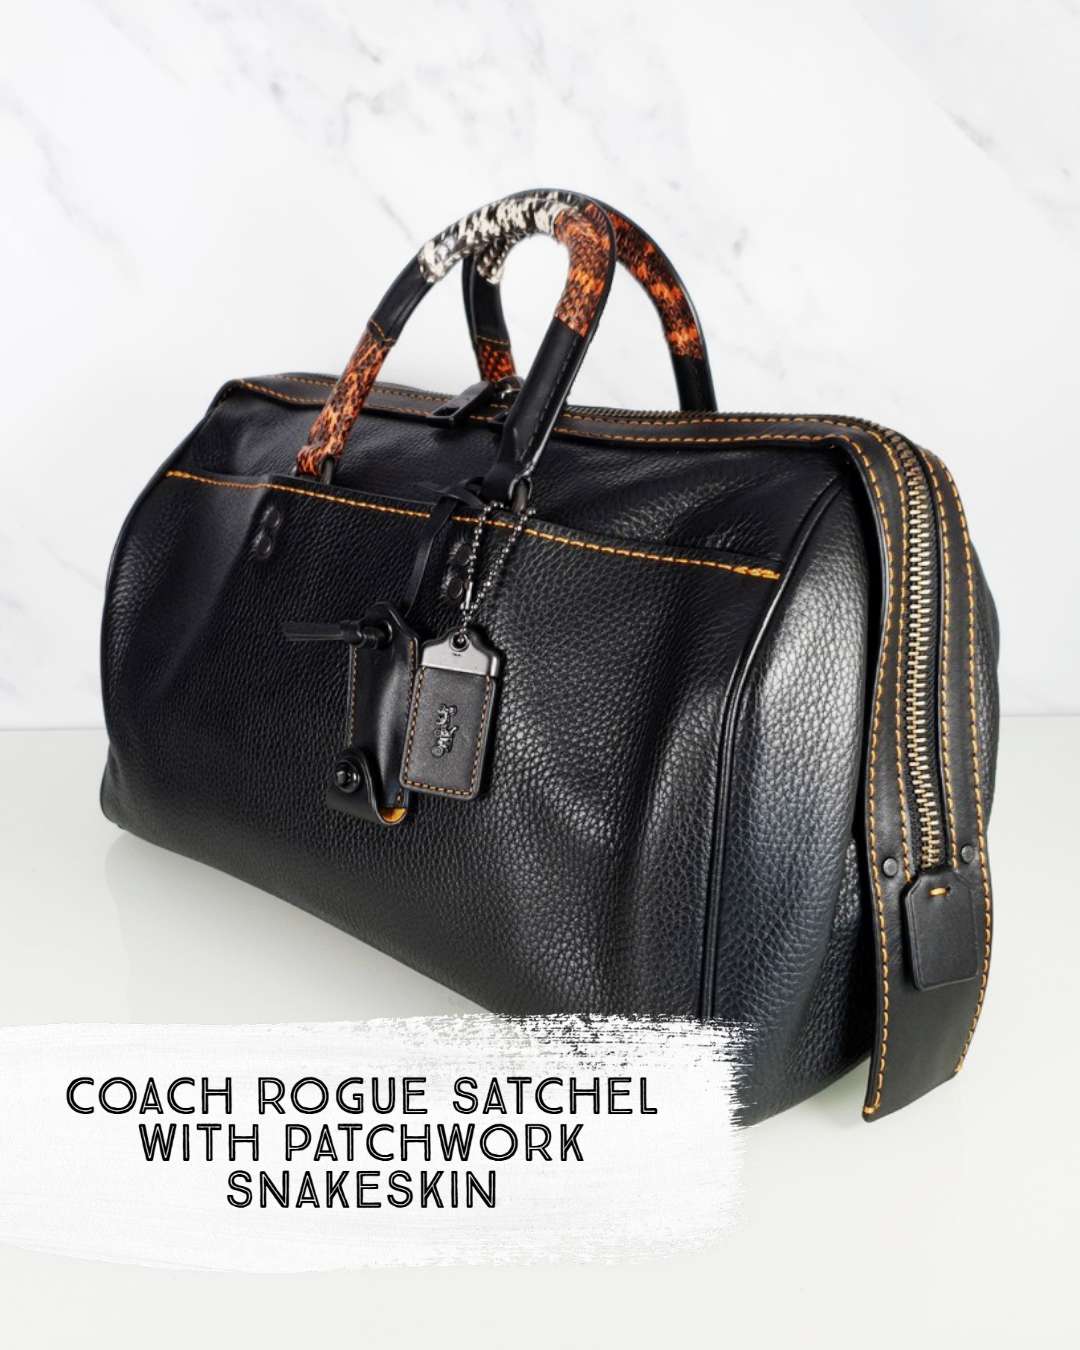 Coach Rogue Satchel in Black Pebble Leather With Patchwork Snakeskin Handle - Essex Fashion House